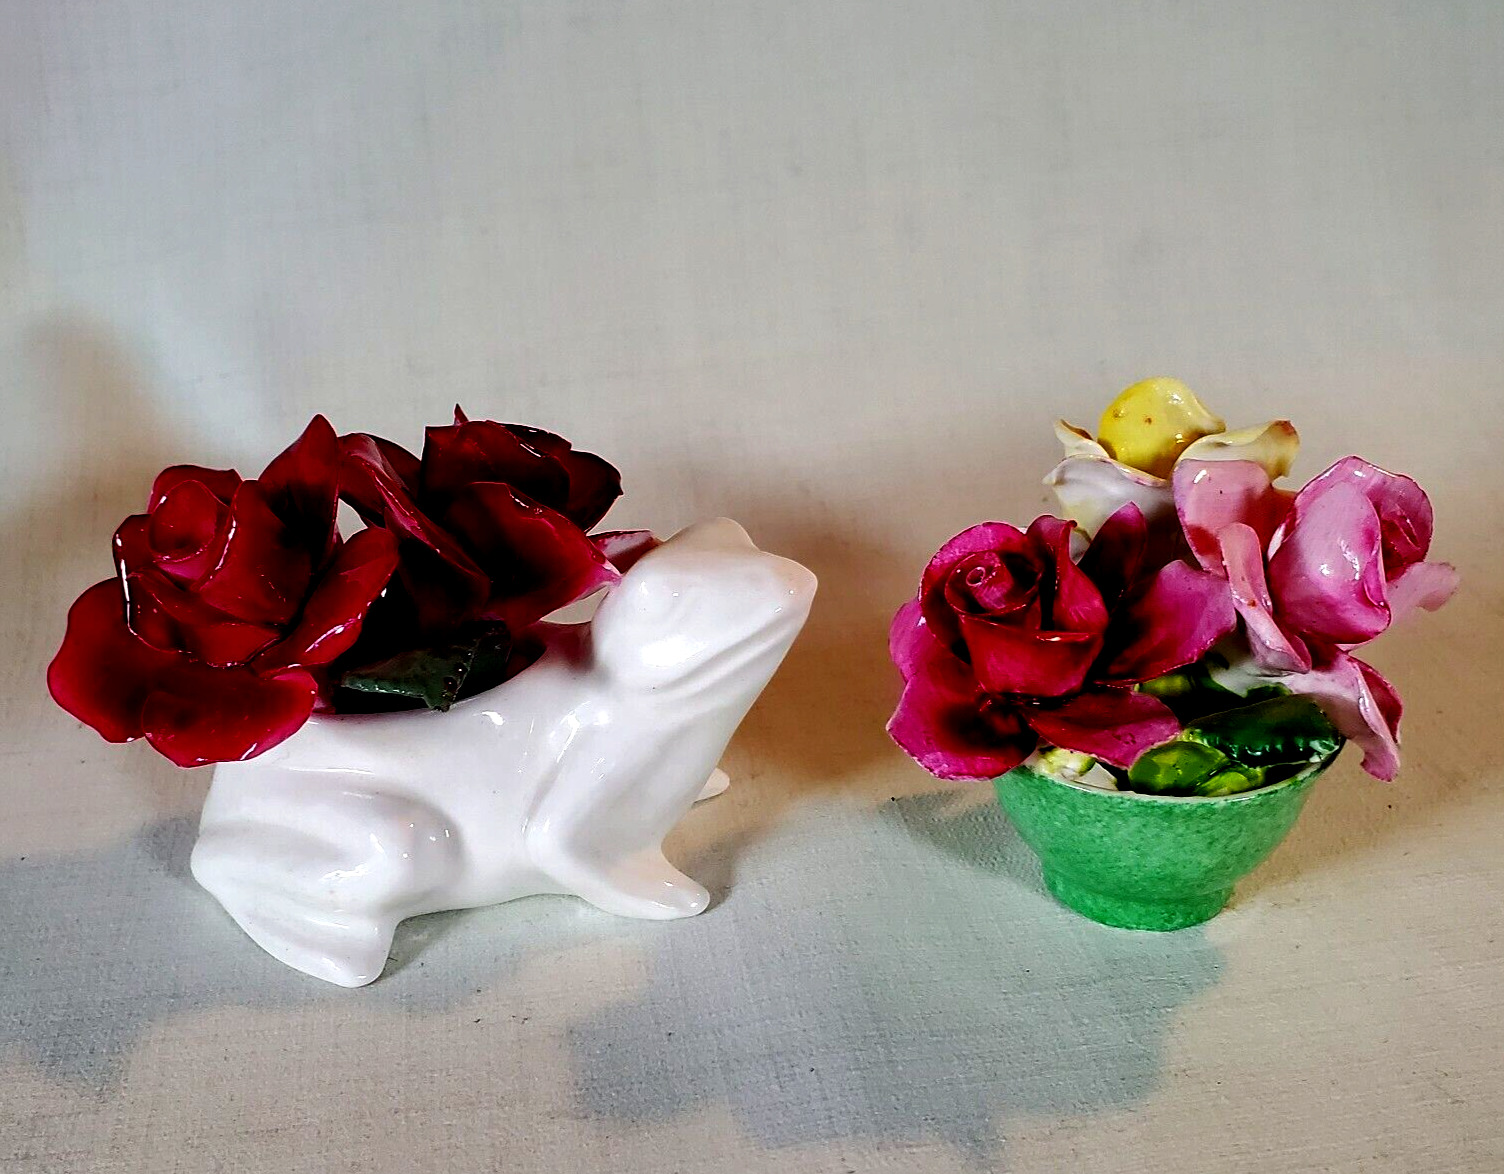 Crown Straffordshire Bone China Flower & Frog Figurines Hand Painted Set of Two